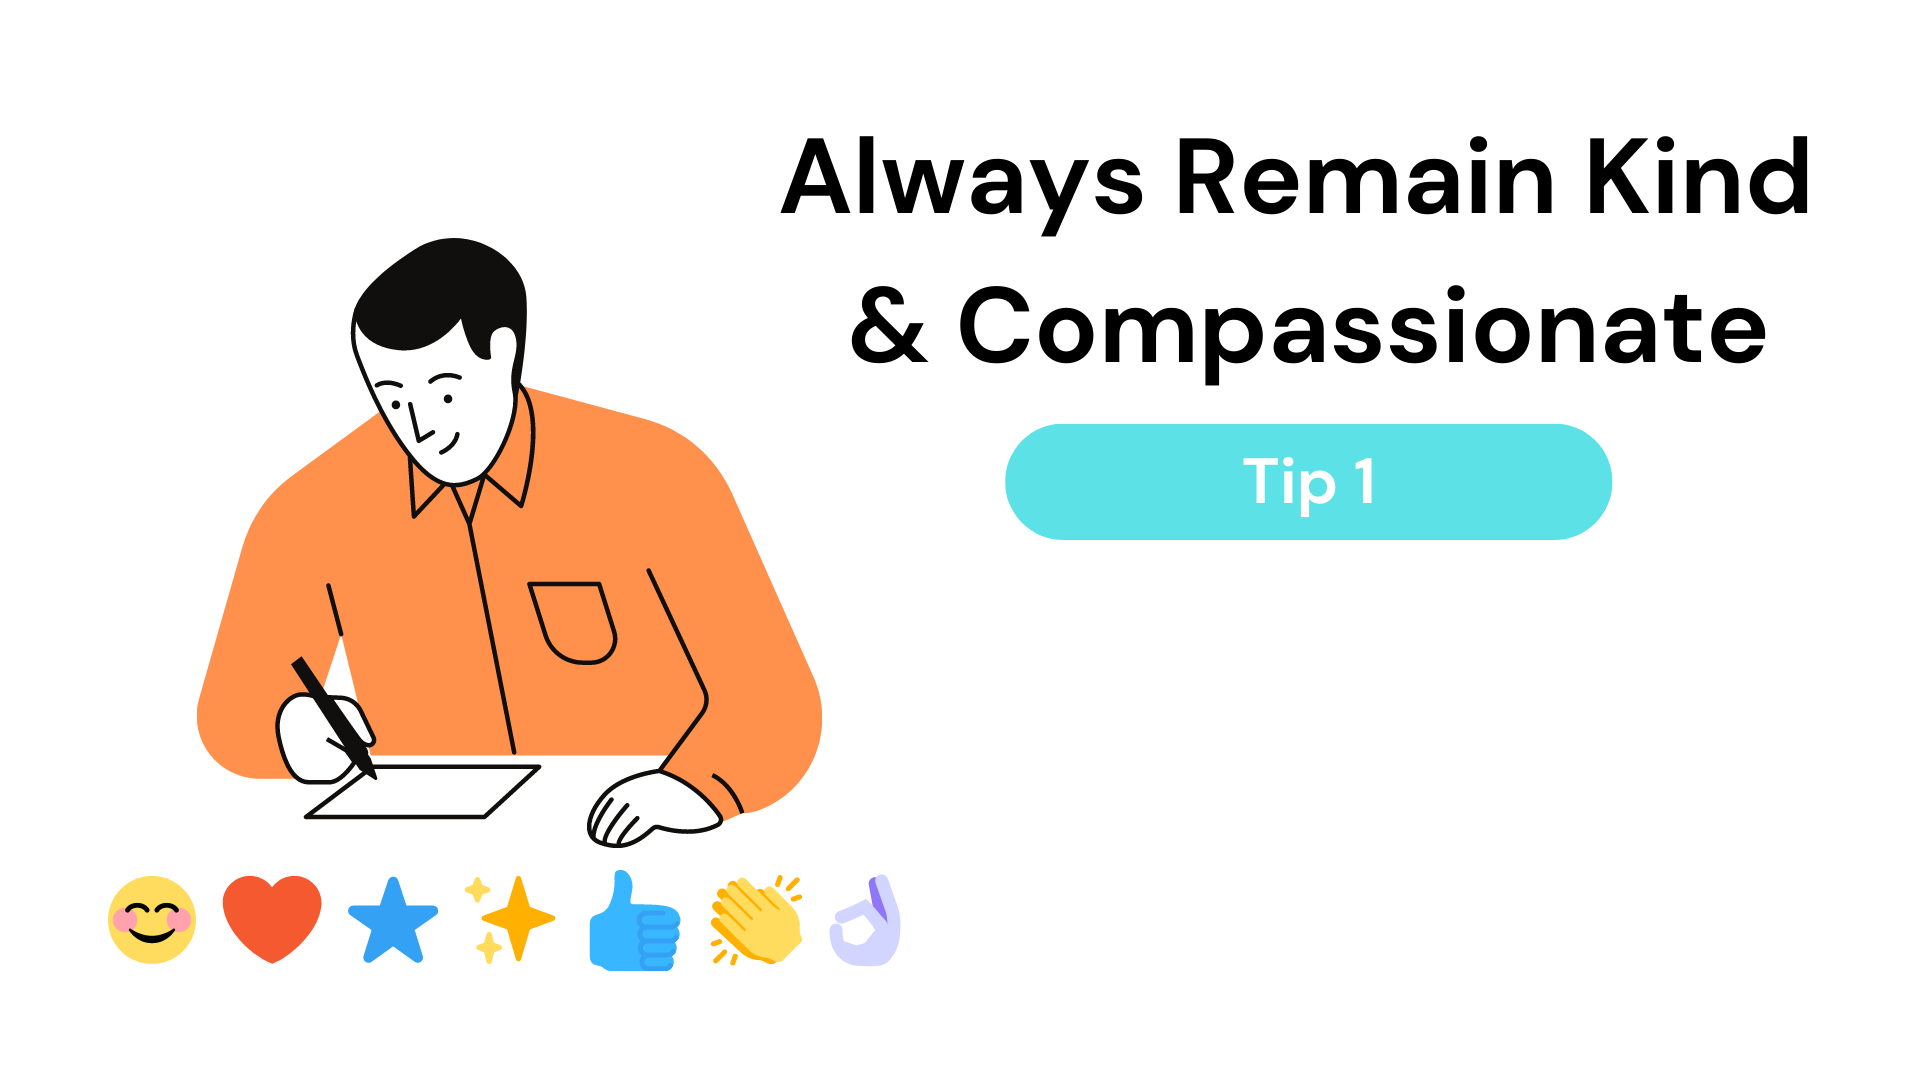 Six-Tips-To-Let-An-Employee-Go-Compassionately-1